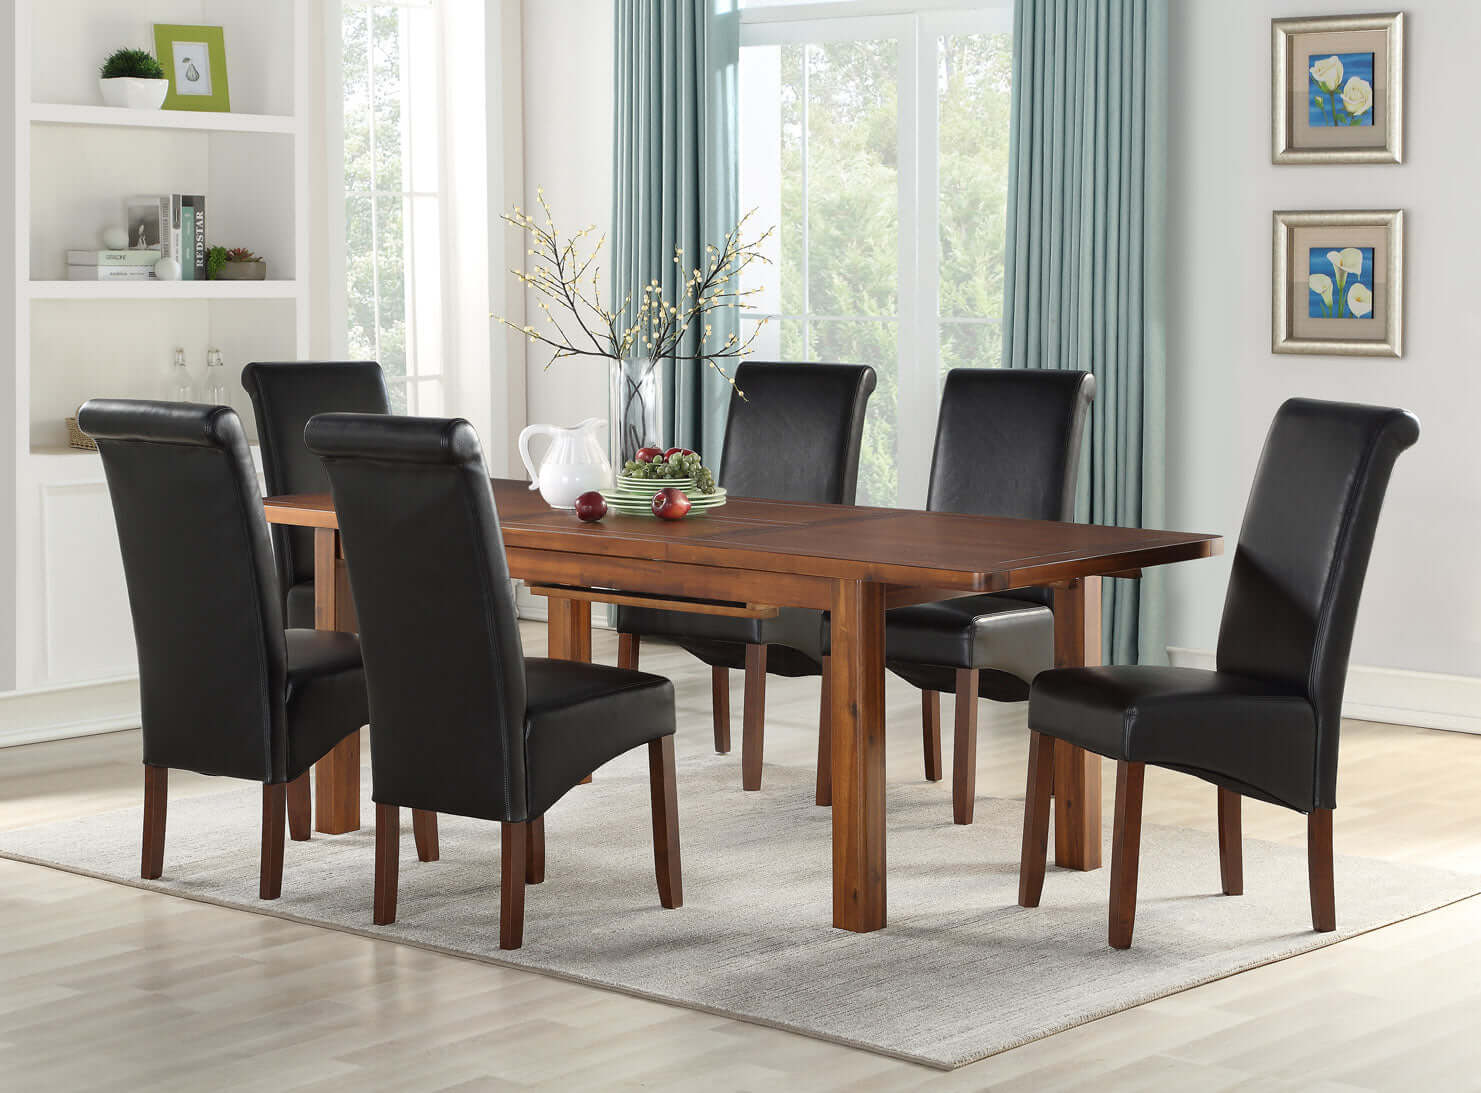 Andorra Acacia 120cm Extension Dining Set - 4 Sophie Black Chairs